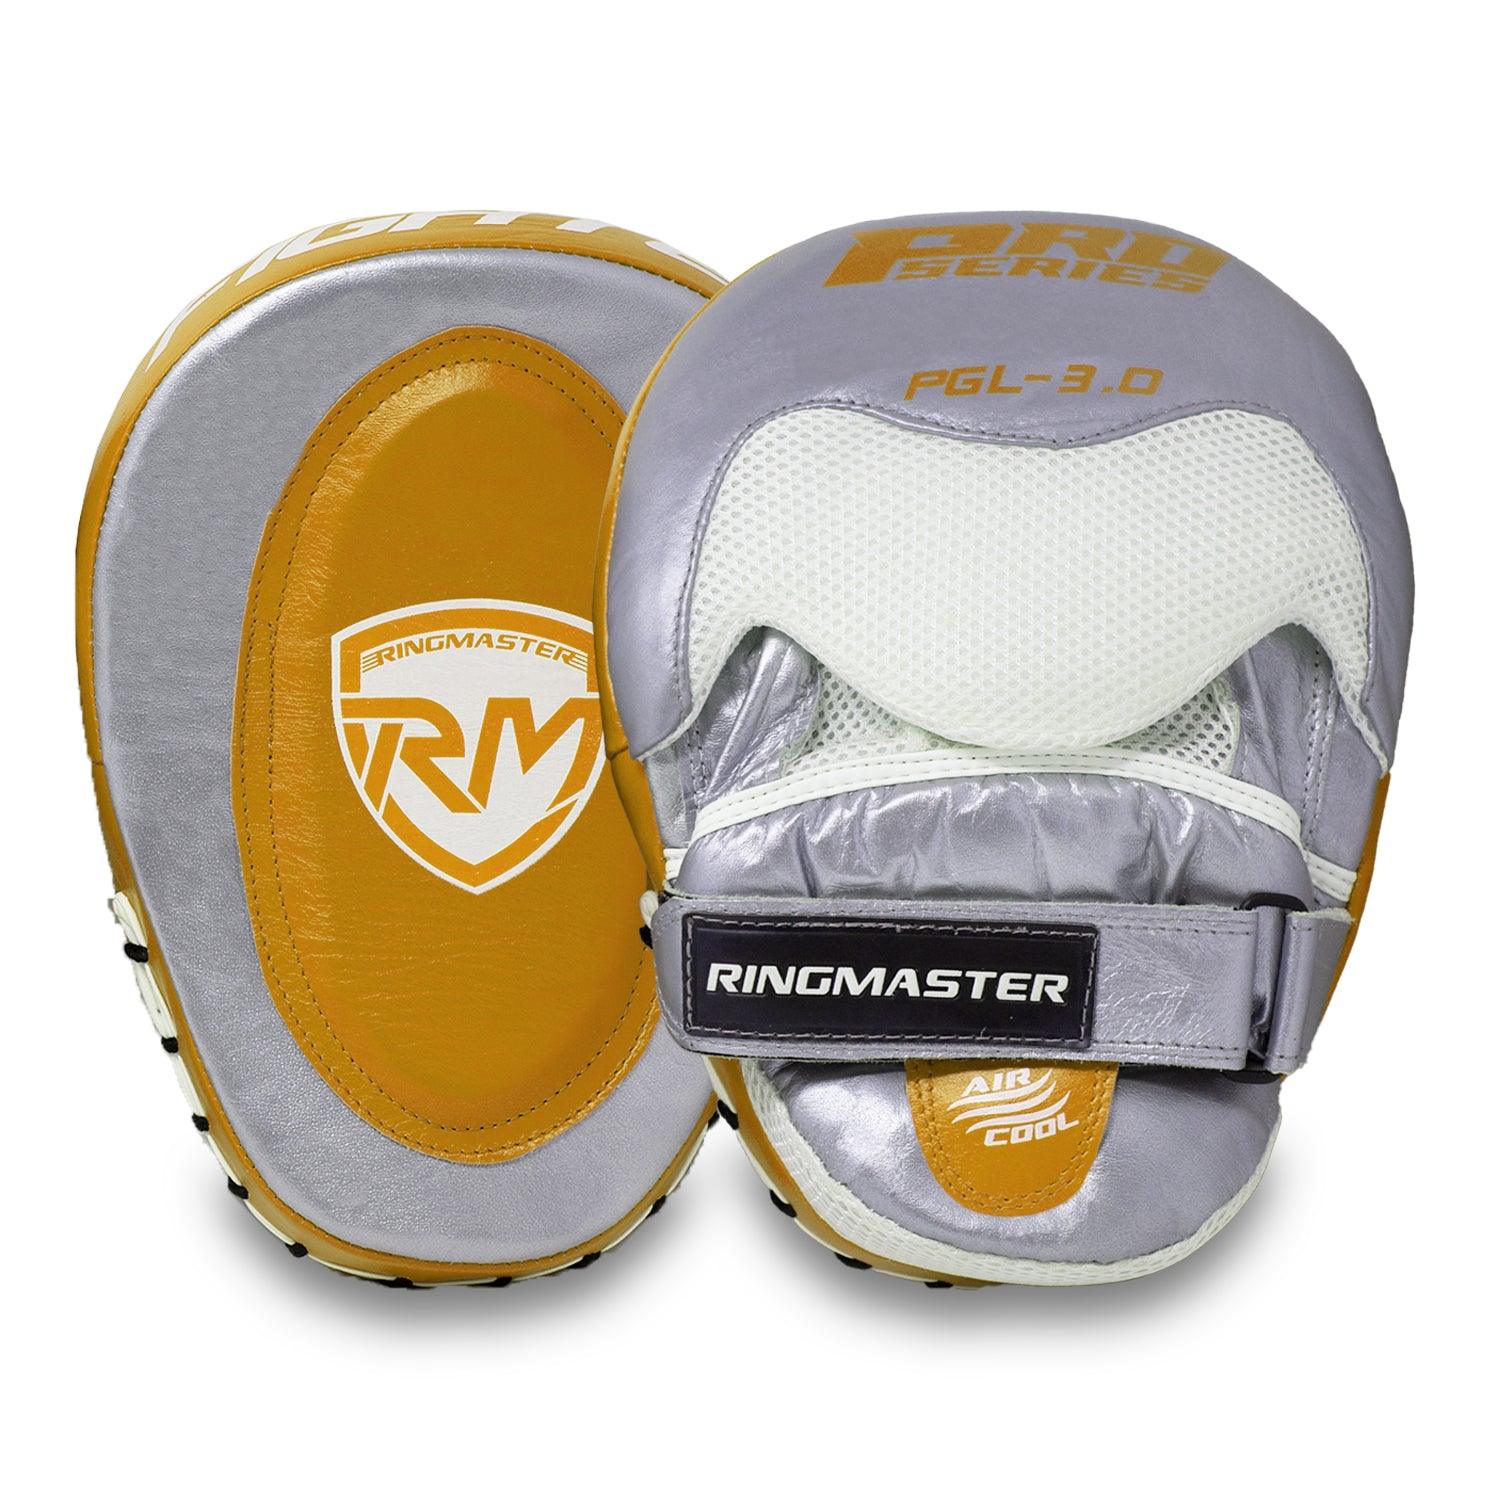 RingMaster Sports Focus pads Genuine Leather PGL 3.0 Gold and Silver image 3